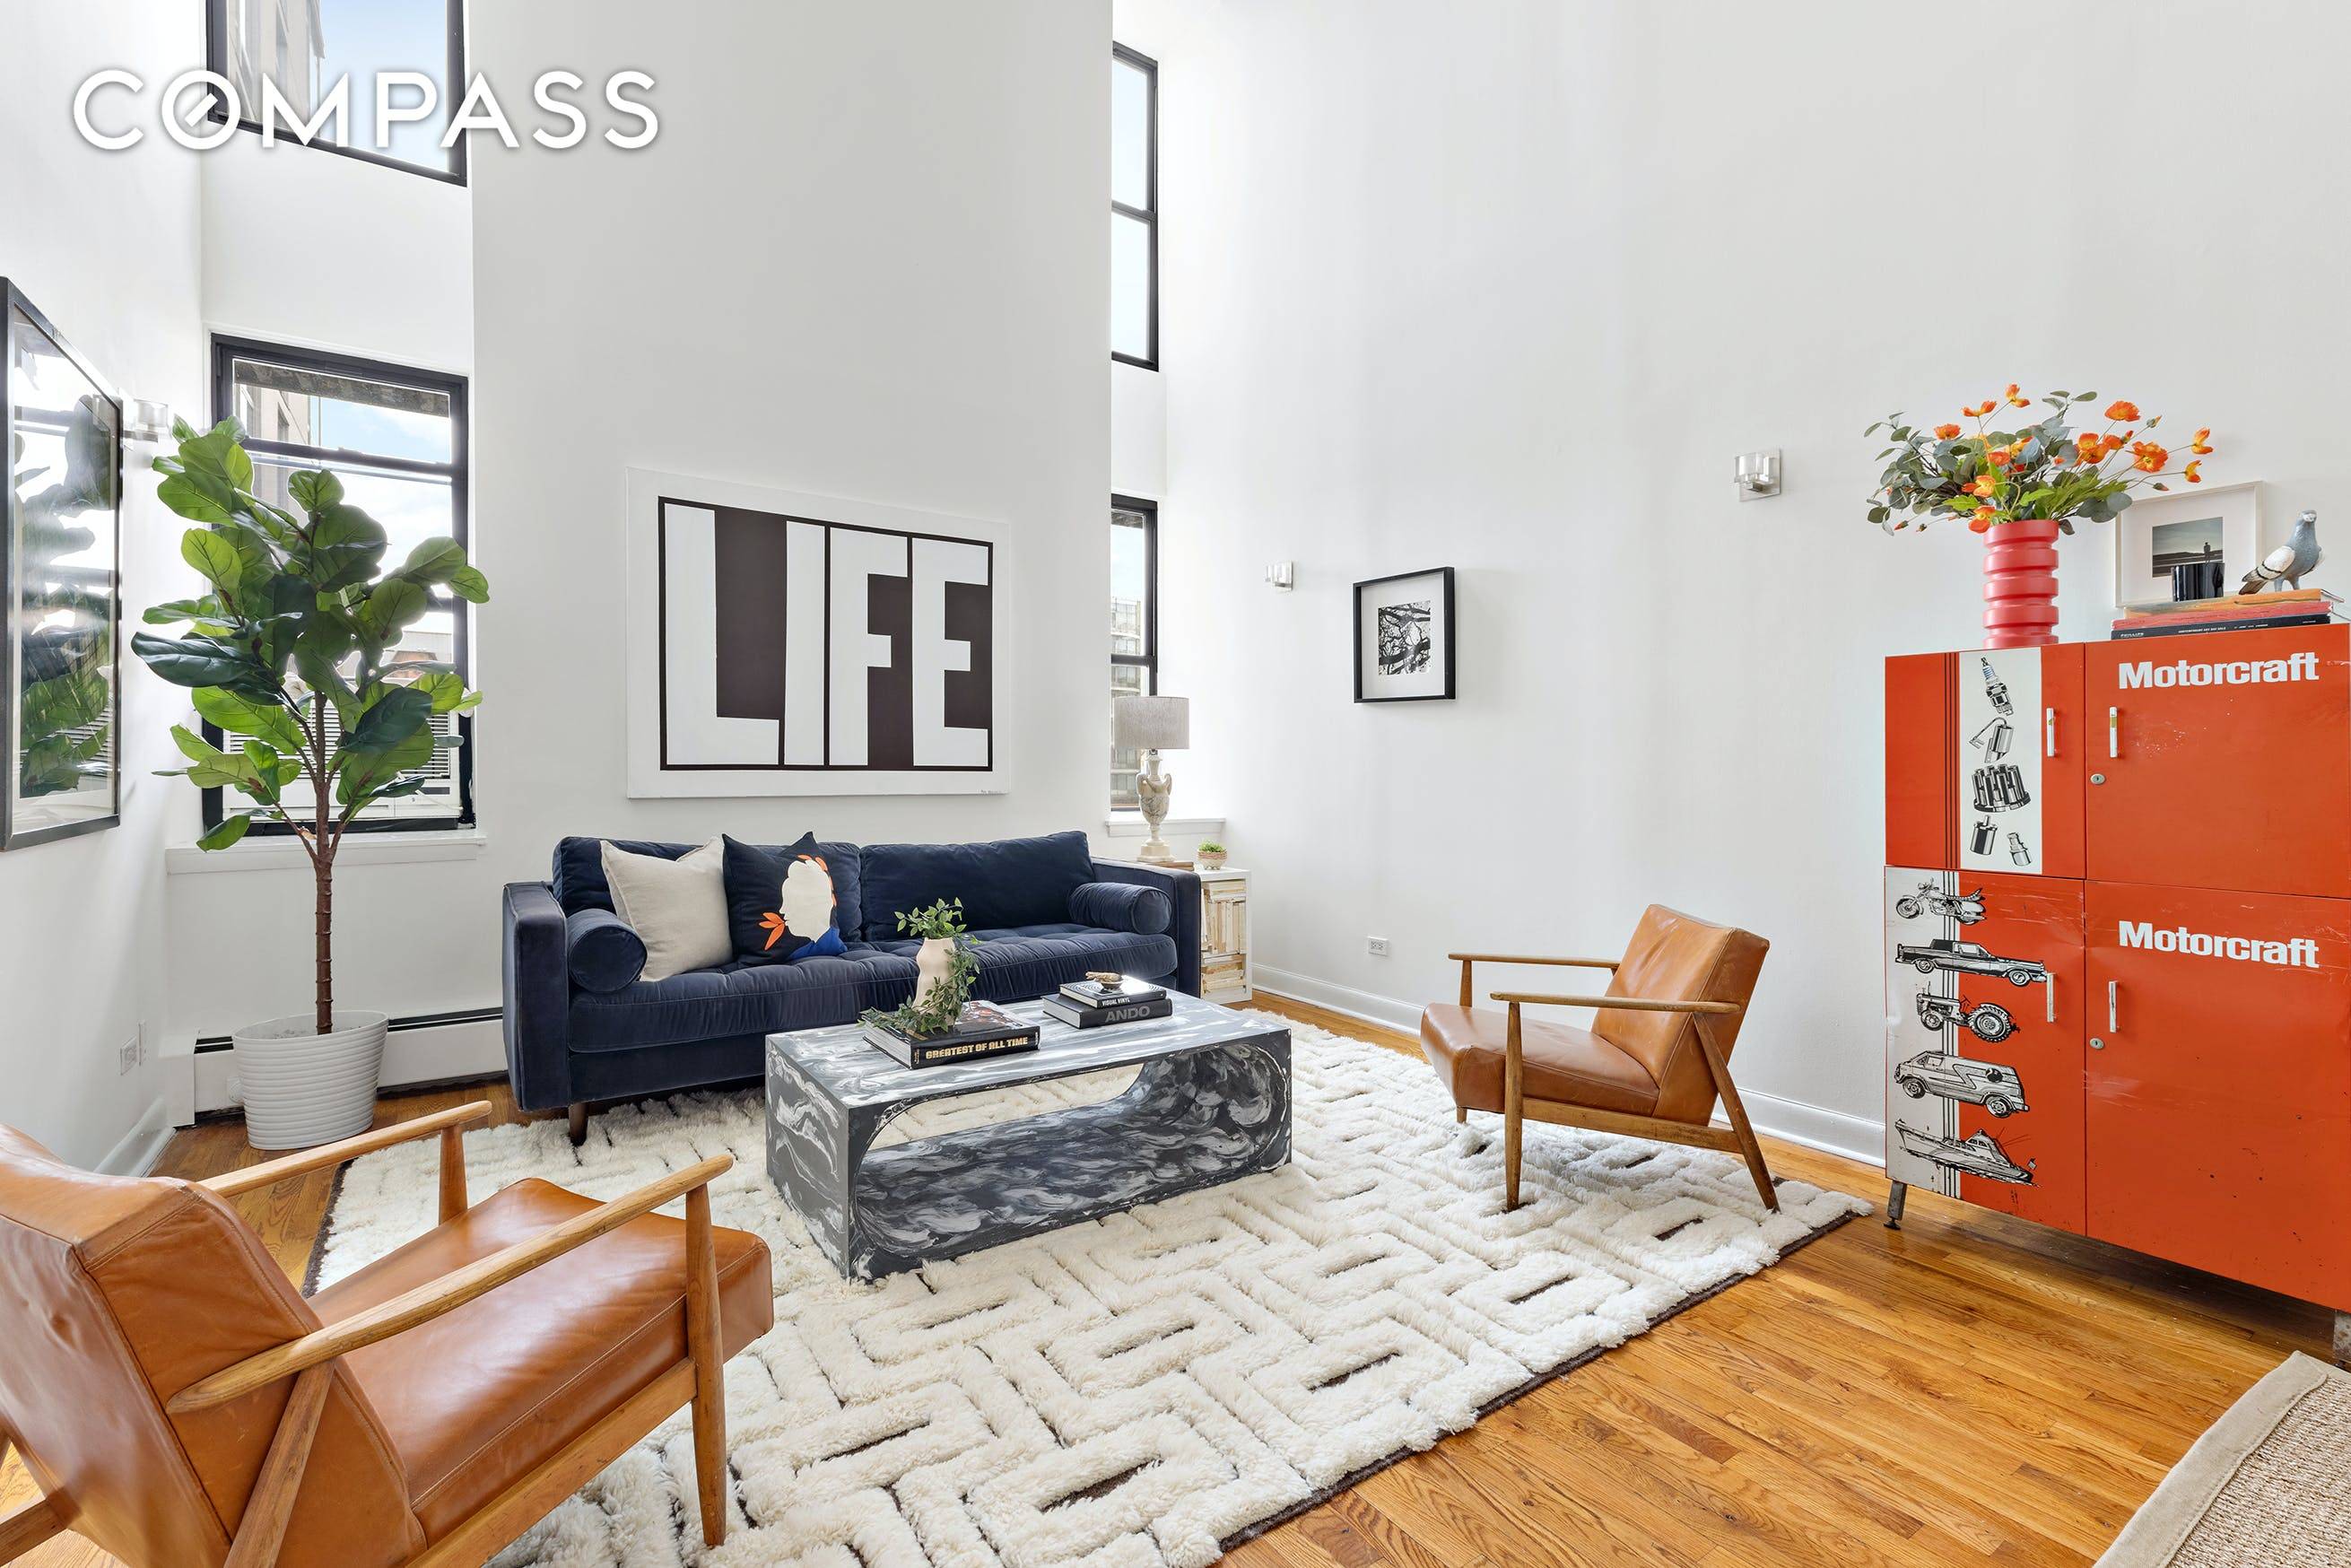 This stunning and dramatic Park Slope loft duplex located in the uber cool Milk Factory Building the old Borden milk factory will immediately wow you with its soaring 20 ft ...